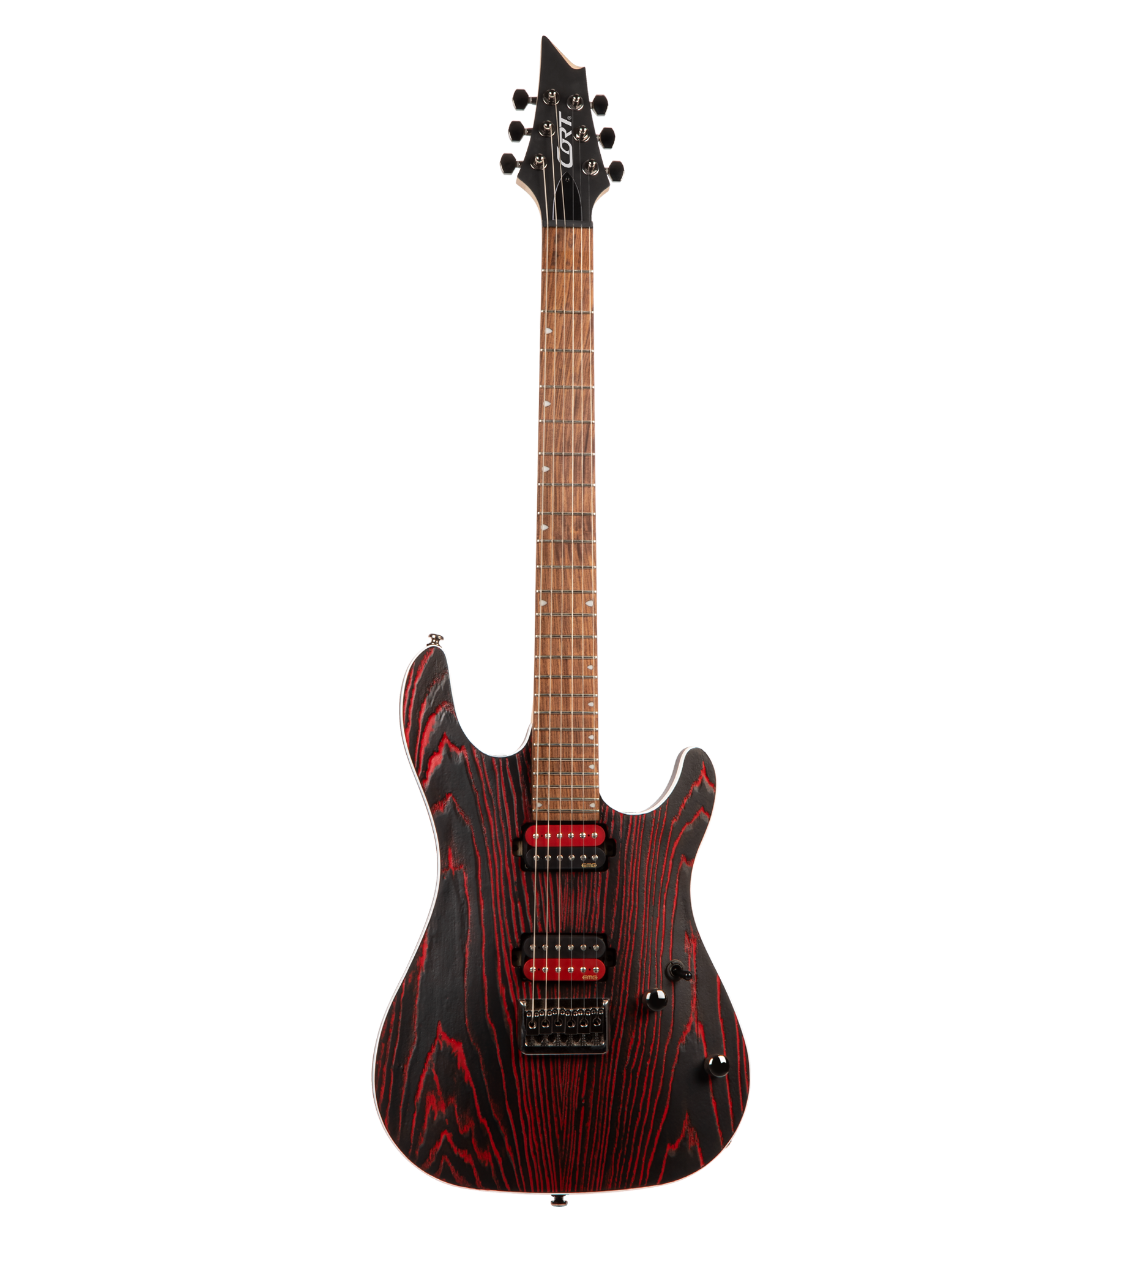 Cort KX300 Electric Guitar Etched Black and Red